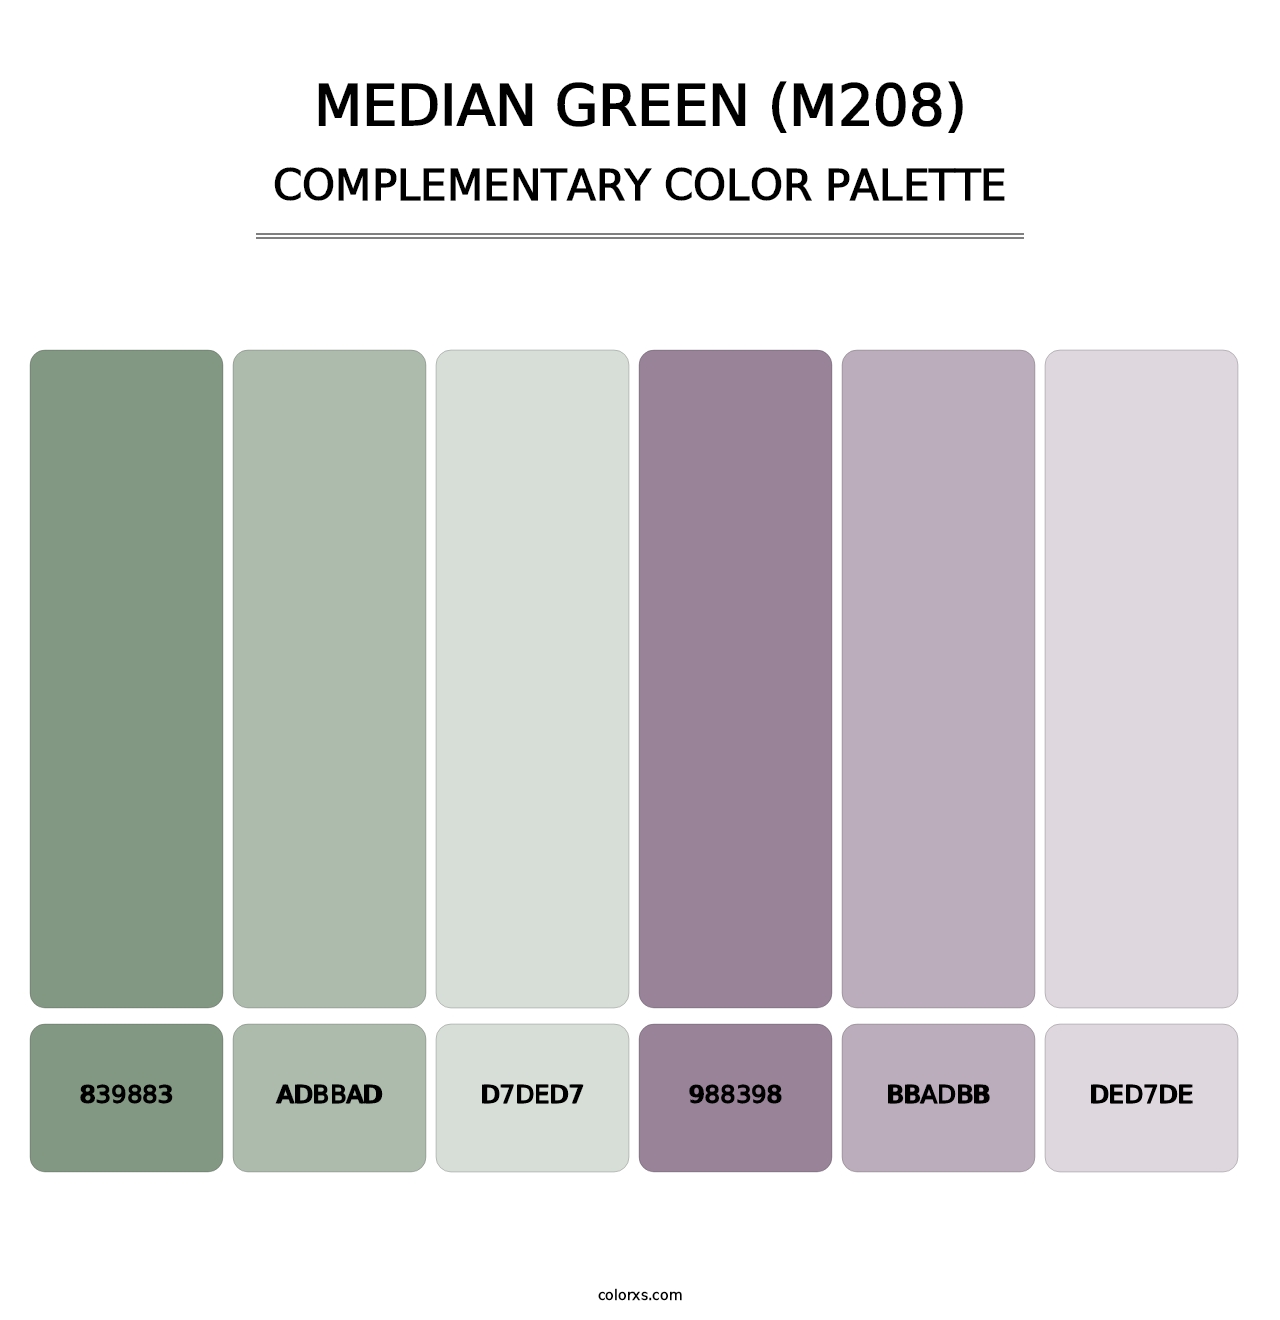 Median Green (M208) - Complementary Color Palette